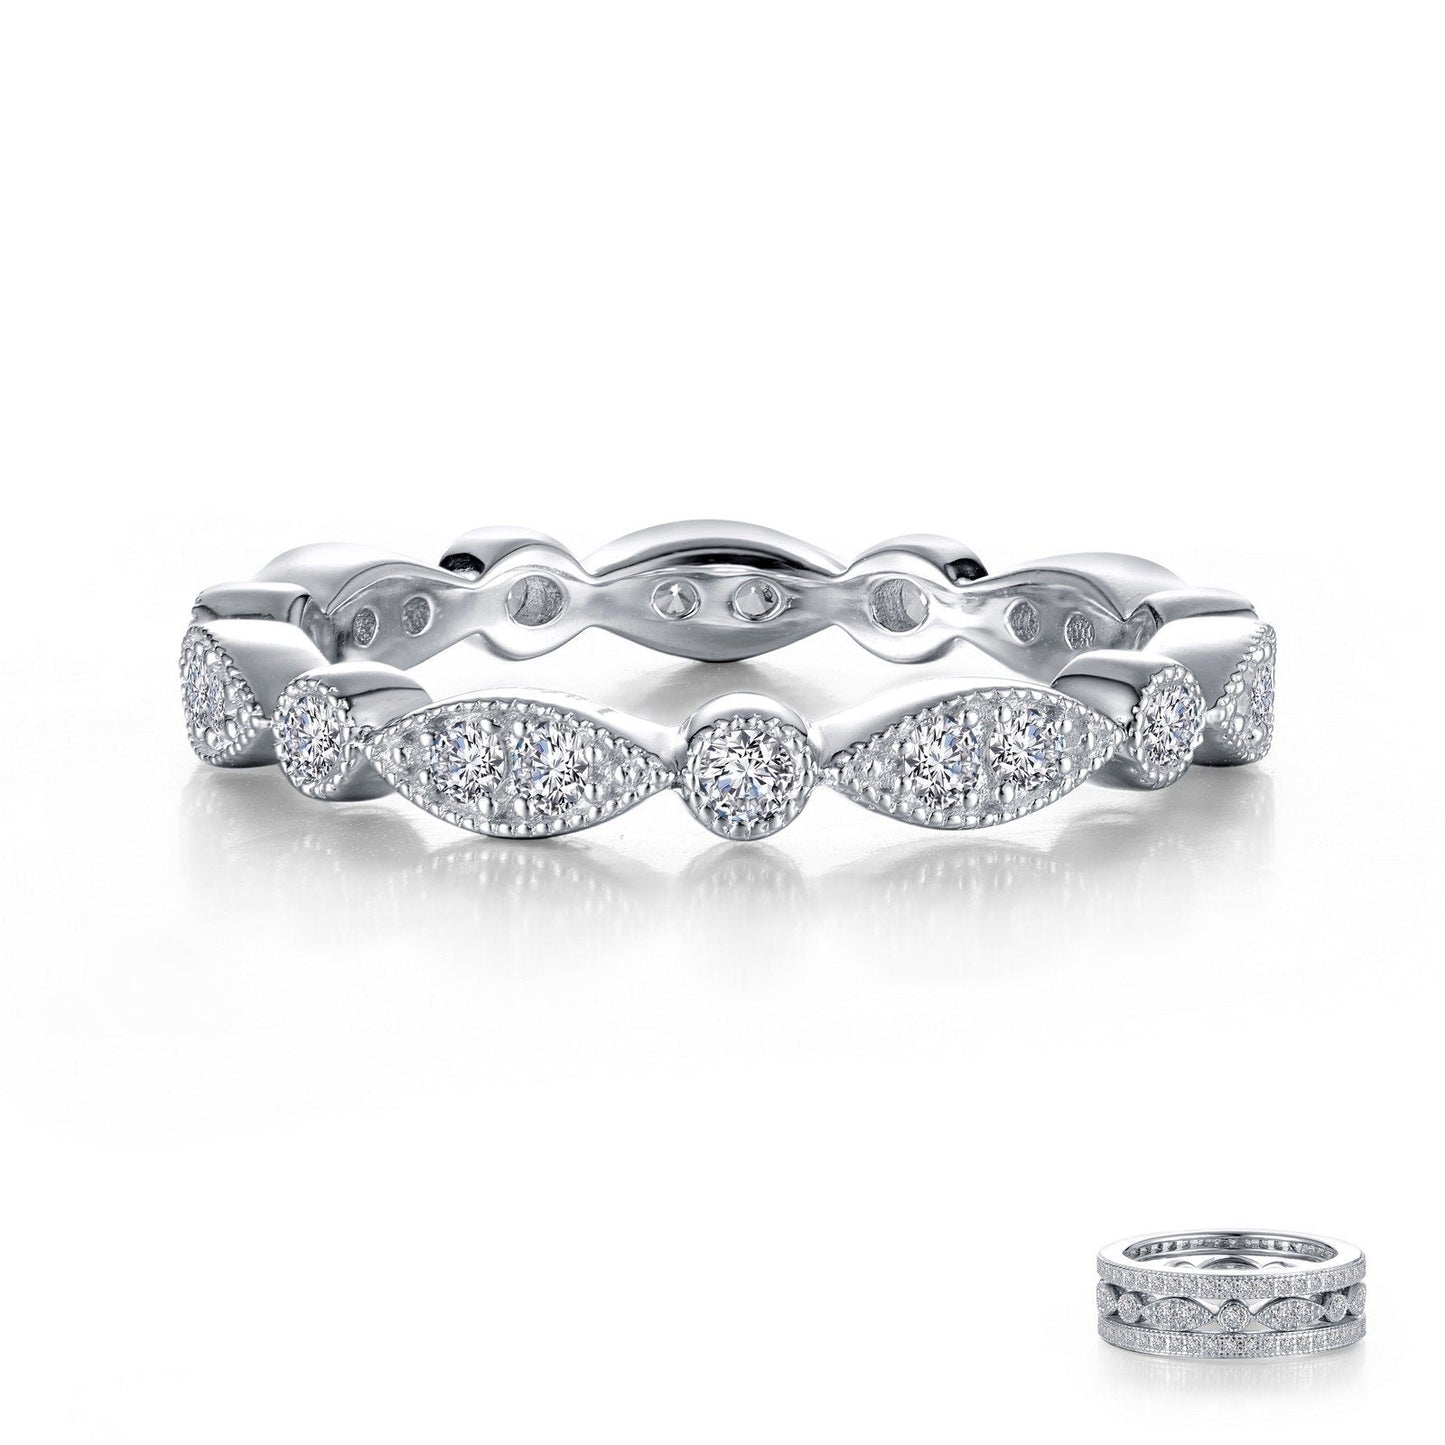 Lafonn Stackable Wave Eternity Band Simulated Diamond RINGS Size 7 Platinum 0.32 CTS Approx.2.80mm(W)